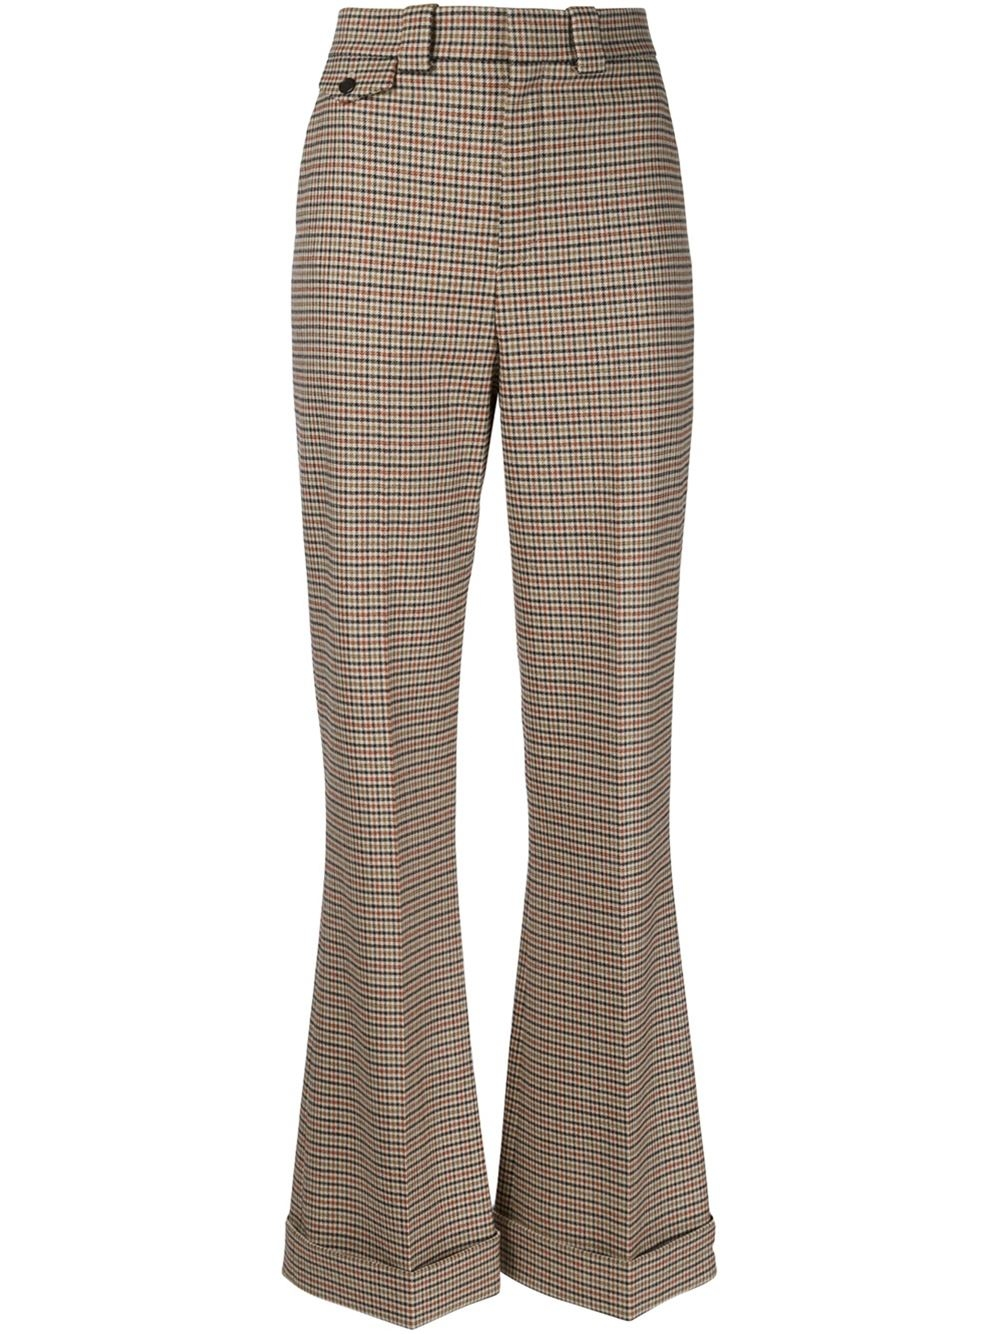 Chloé Plaid Flared Trousers in Multicolor | Lyst